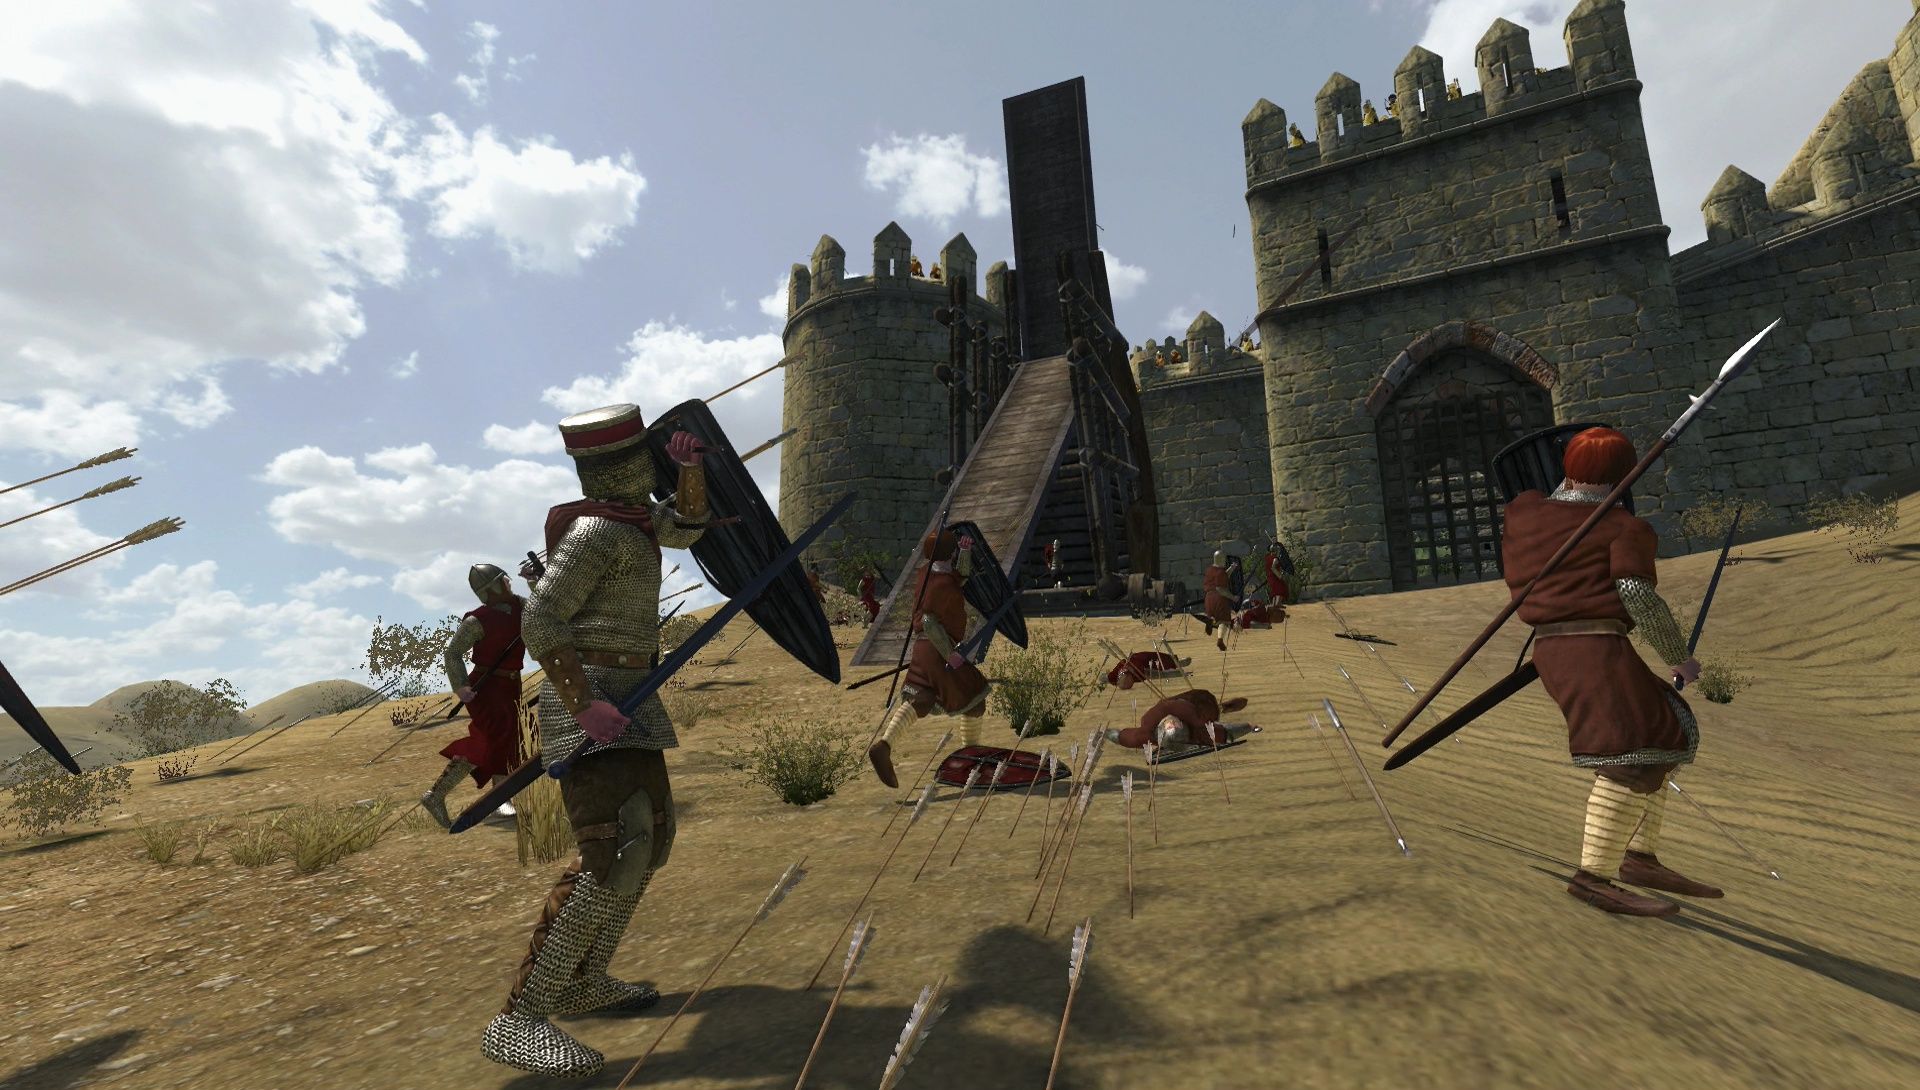 Amazing Mount & Blade: Warband Pictures & Backgrounds